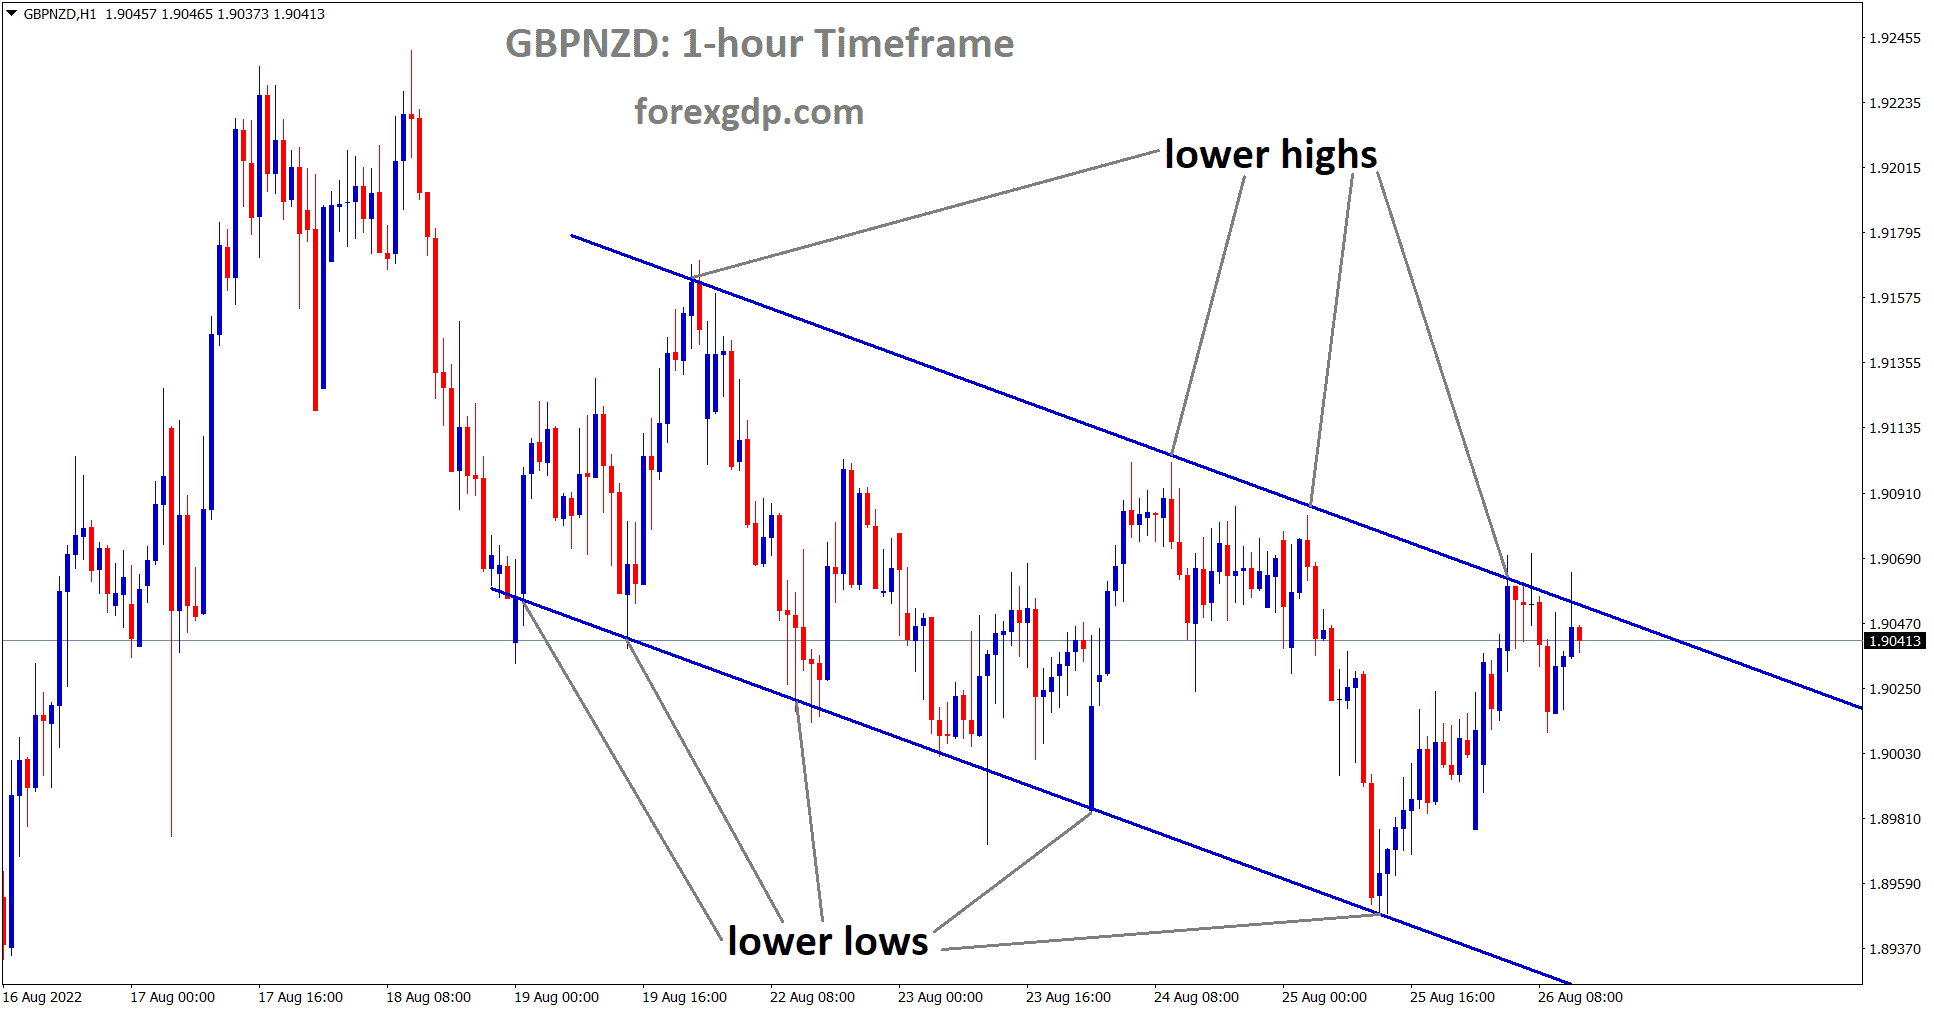 GBPNZD is moving in the Descending channel and the market has reached the Lower high area of the channel.